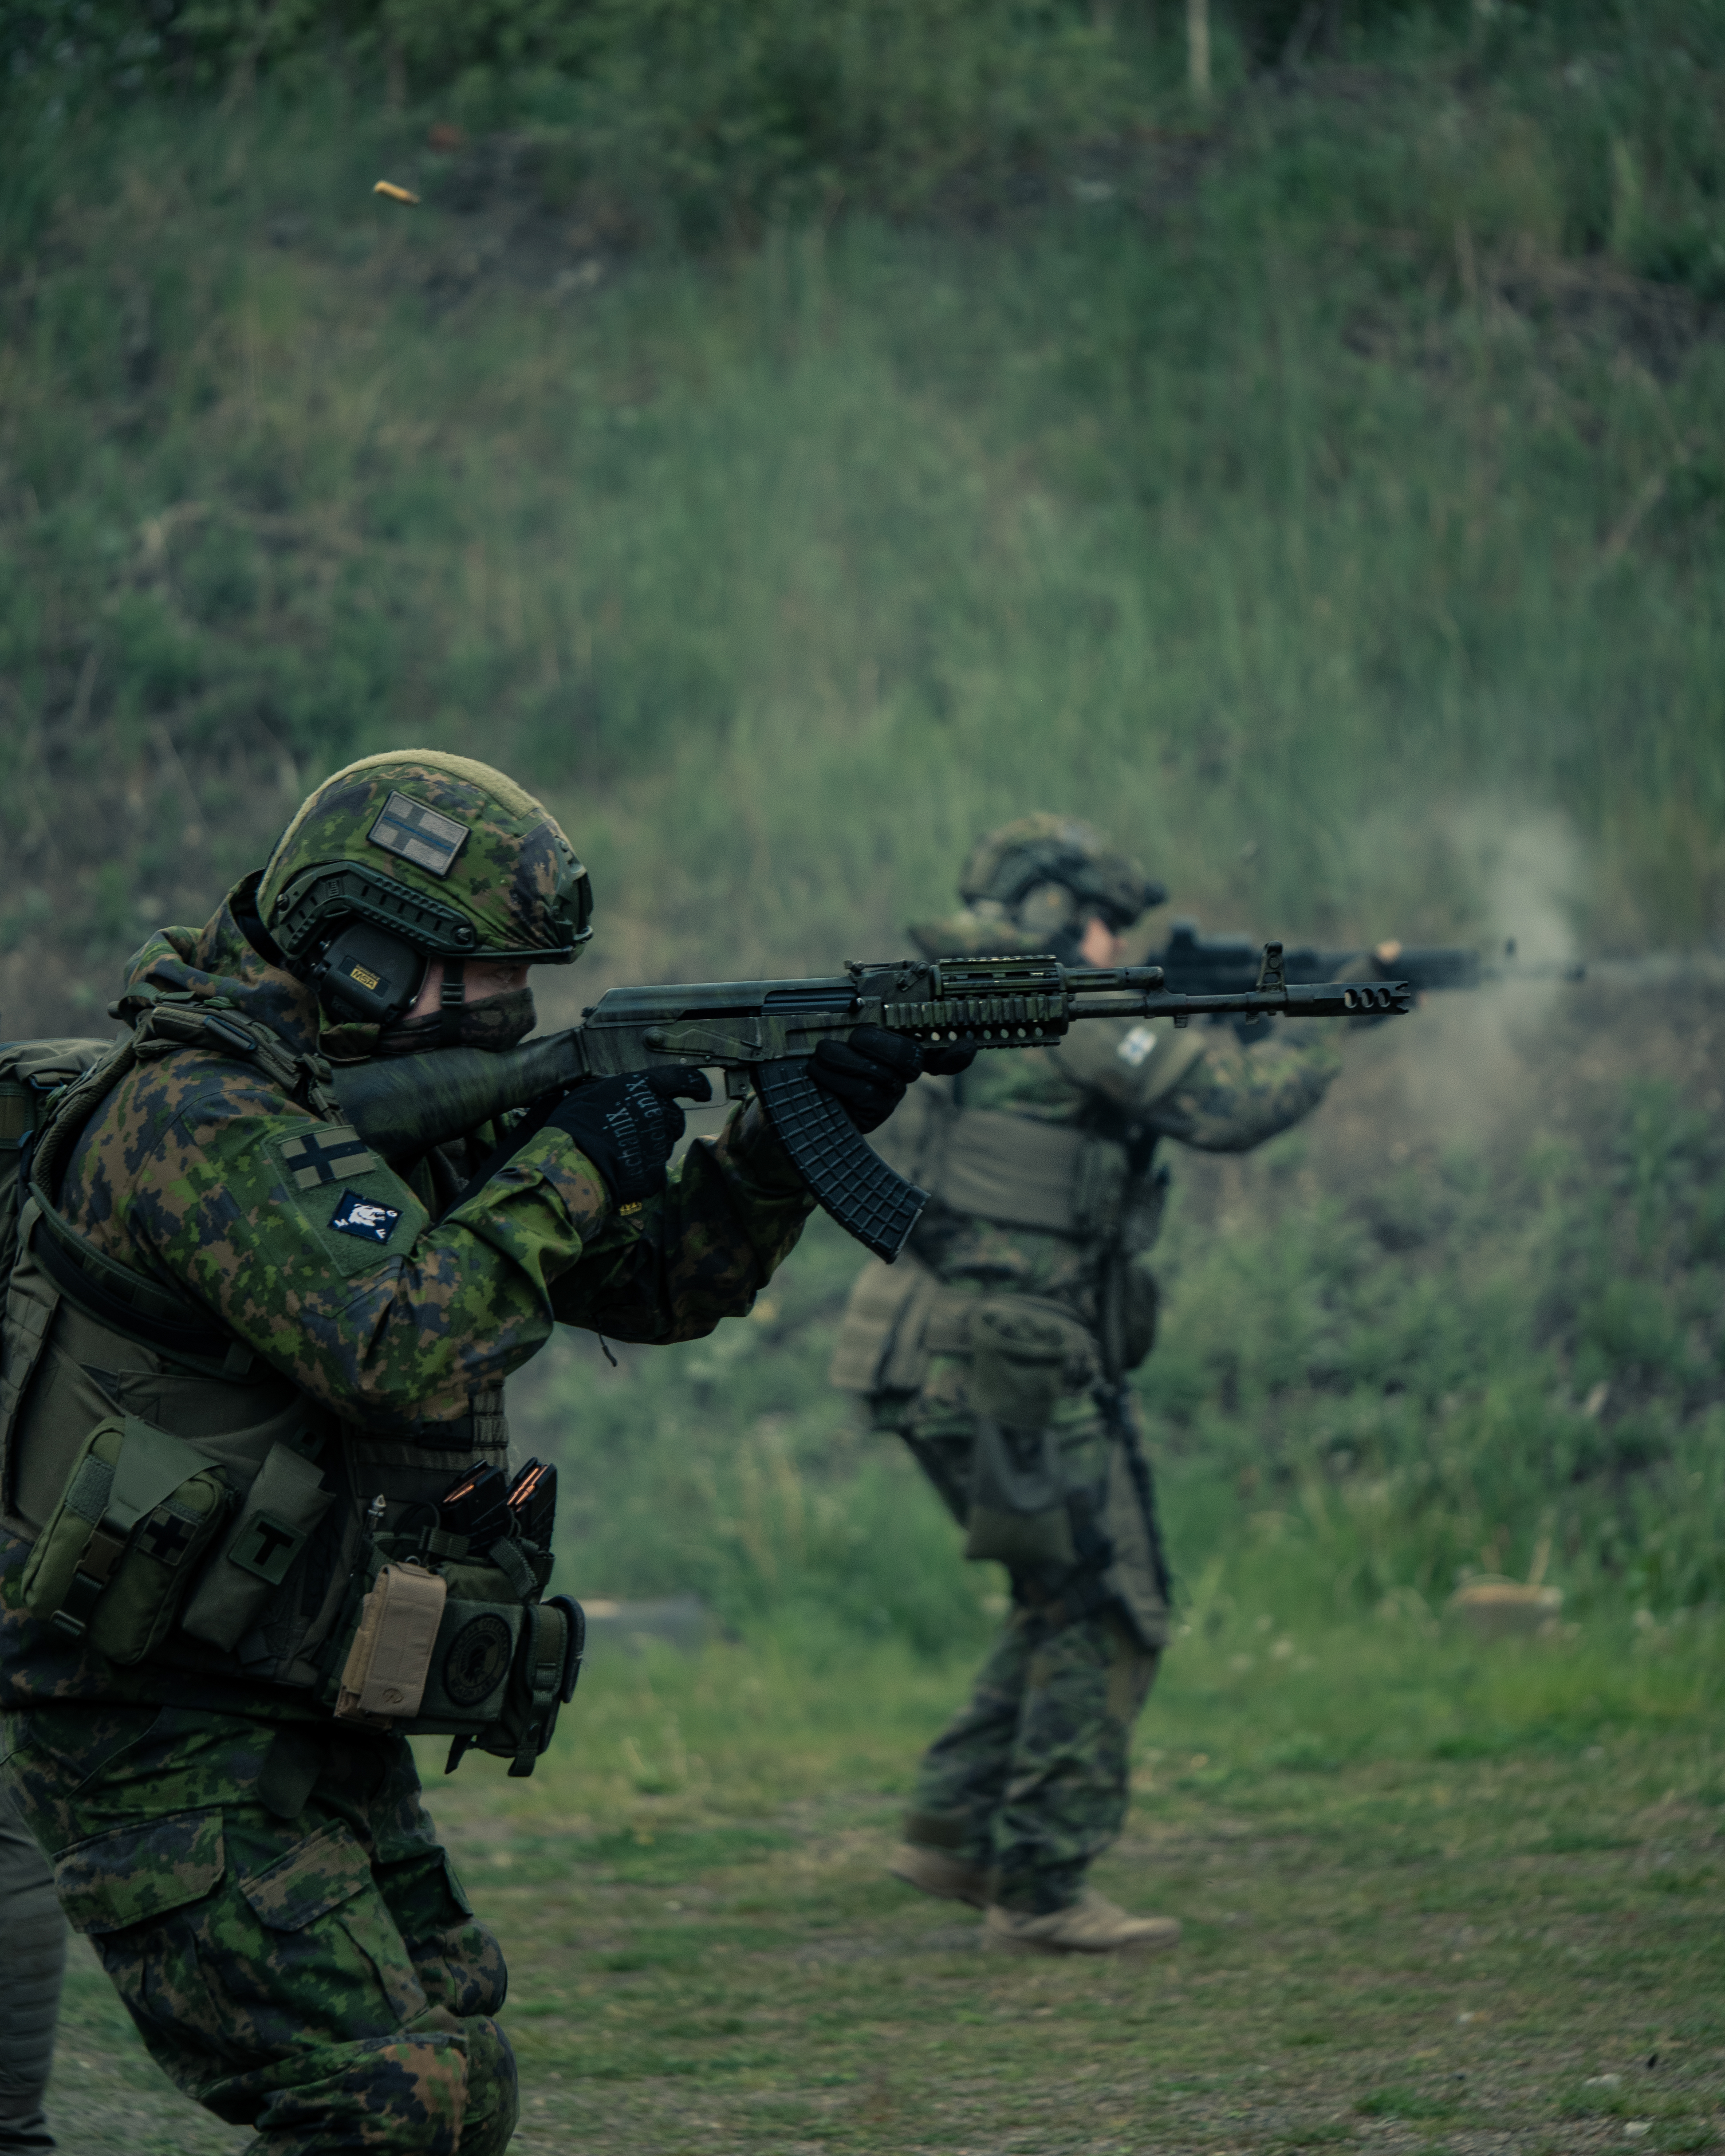 Two men with rifles in a high stance are shooting on a shooting range. One of men has a ak47 rifle, he is wearing a M05 camo jacket, M05 camo pants, a plate carrier, boots and a protection group denmark pgd ballistic helmet. The other man is wearing a M05 clothing, a plate carrier, a ballistic helmet and a  battle belt. He has a ak-47 rifle with a eotech holographic sight. Shell casings are flying through the air.  Finnish reservists